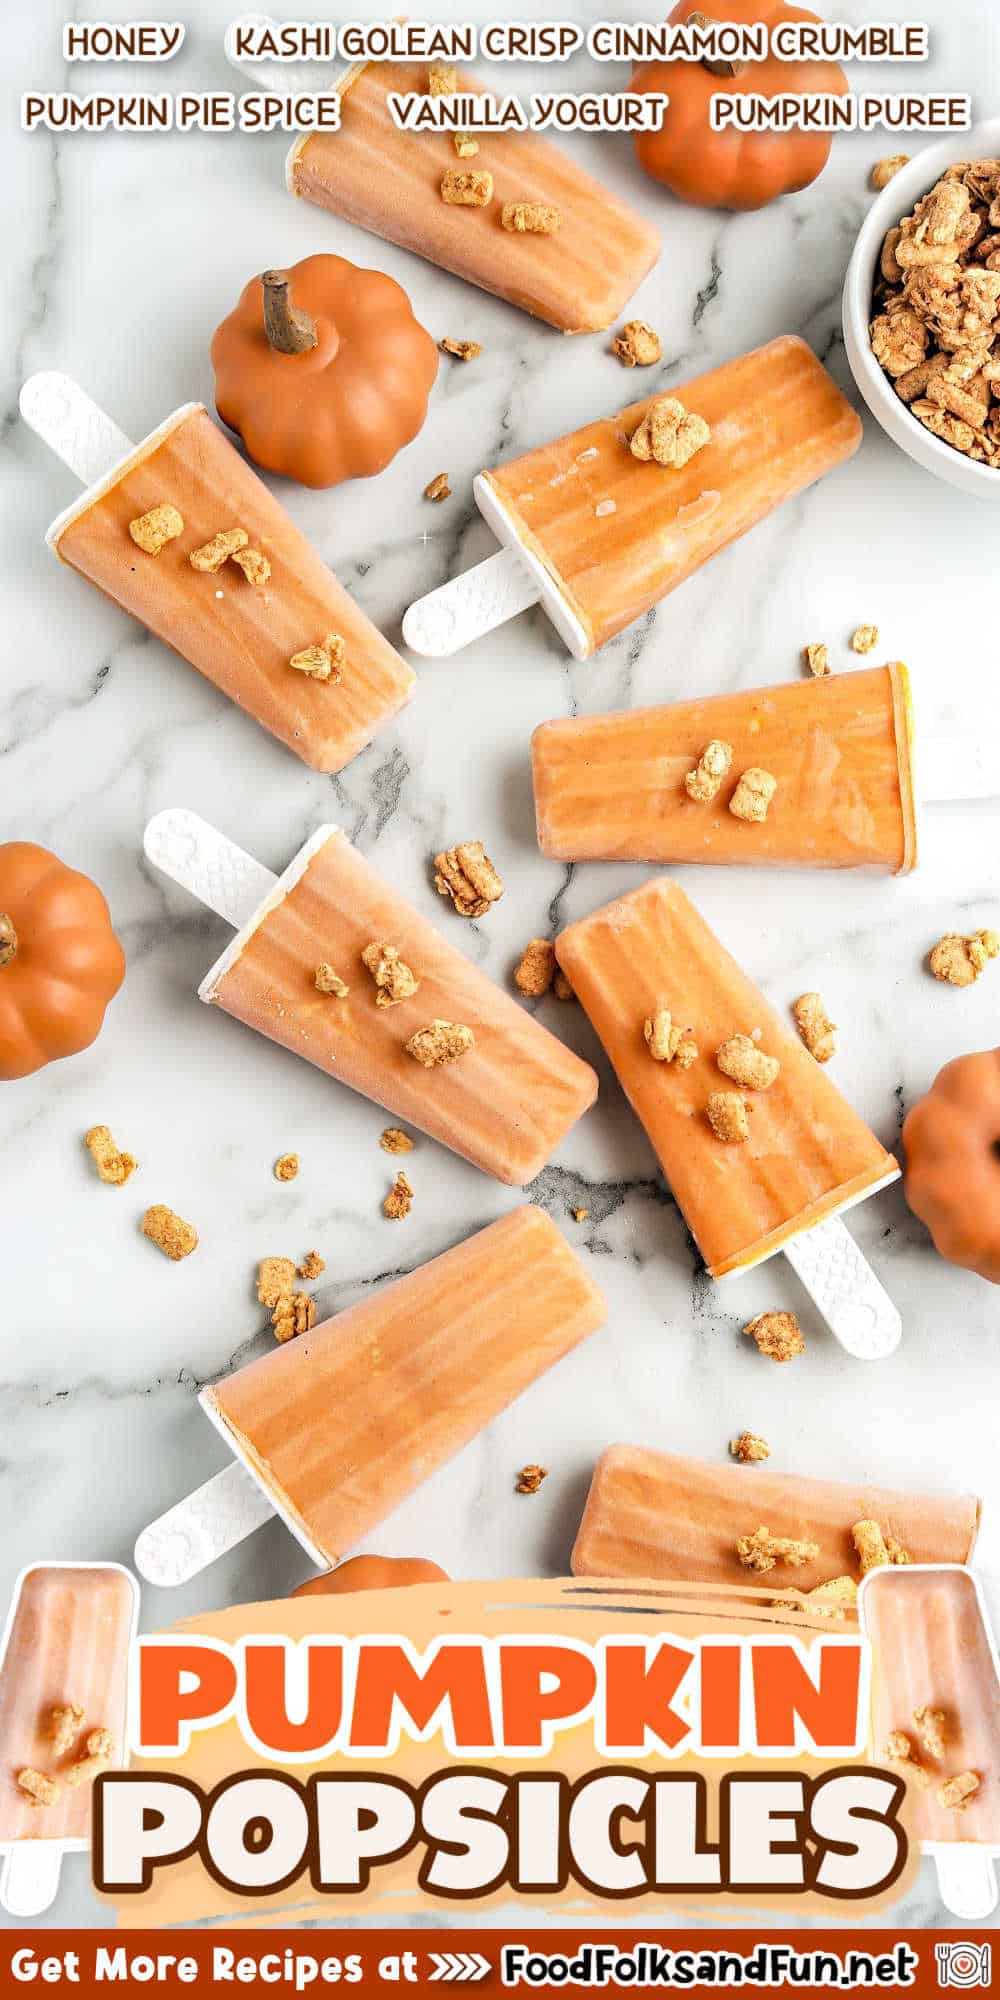 These pumpkin breakfast popsicles are a great way to start your day as an easy, on-the-go breakfast! Plus, they’re surprisingly filling and taste like pumpkin pie!

 via @foodfolksandfun